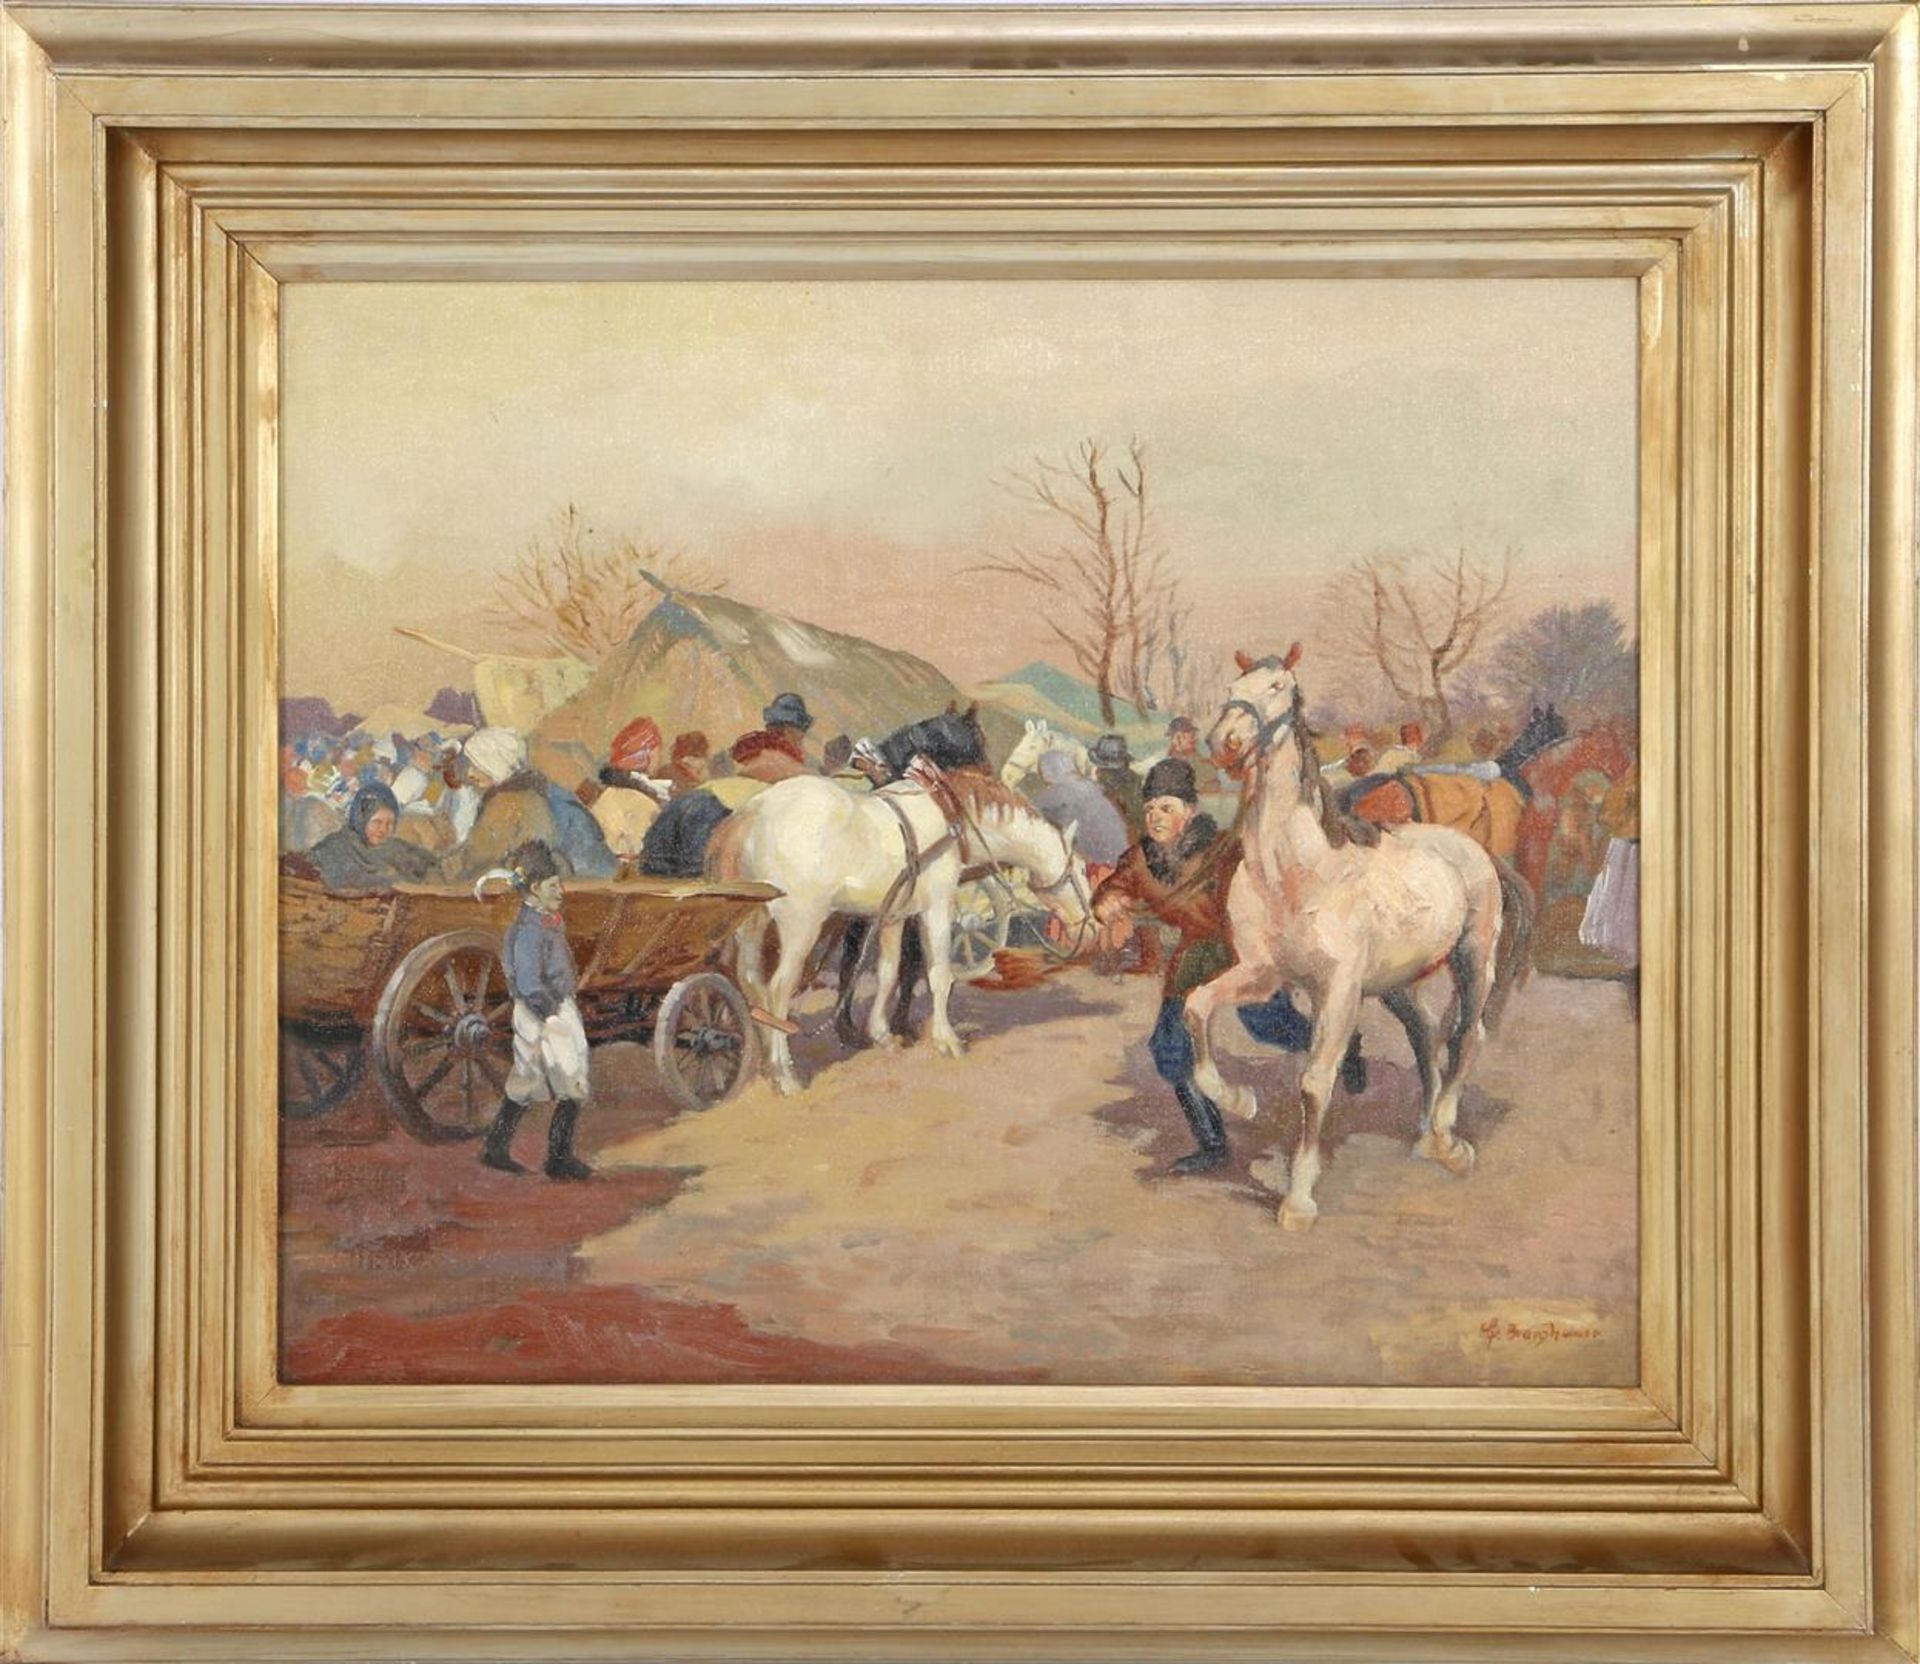 Signed G Berghauer, scene with horses, many people